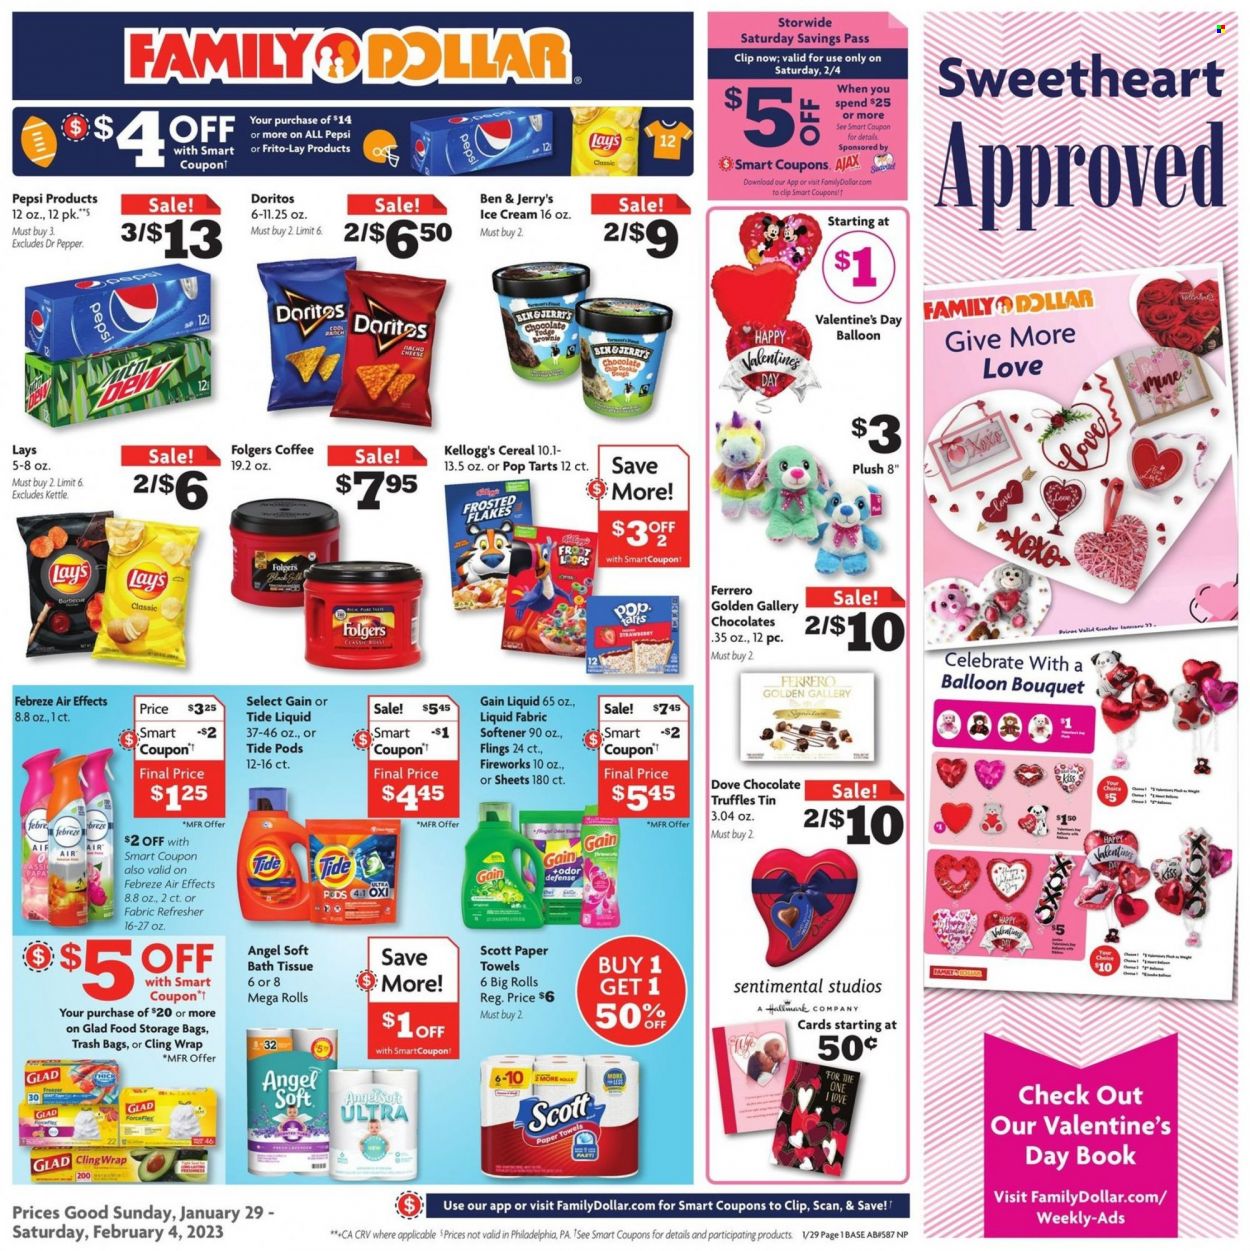 thumbnail - Family Dollar Flyer - 01/29/2023 - 02/04/2023 - Sales products - ice cream, Ben & Jerry's, Dove, chocolate chips, Ferrero Rocher, truffles, Kellogg's, Pop-Tarts, Doritos, Lay’s, Frito-Lay, cereals, Frosted Flakes, Pepsi, Dr. Pepper, coffee, Folgers, bath tissue, Scott, kitchen towels, paper towels, Febreze, Gain, Ajax, Tide, fabric softener, refresher, bag, trash bags, storage bag, balloons, book, bouquet. Page 1.